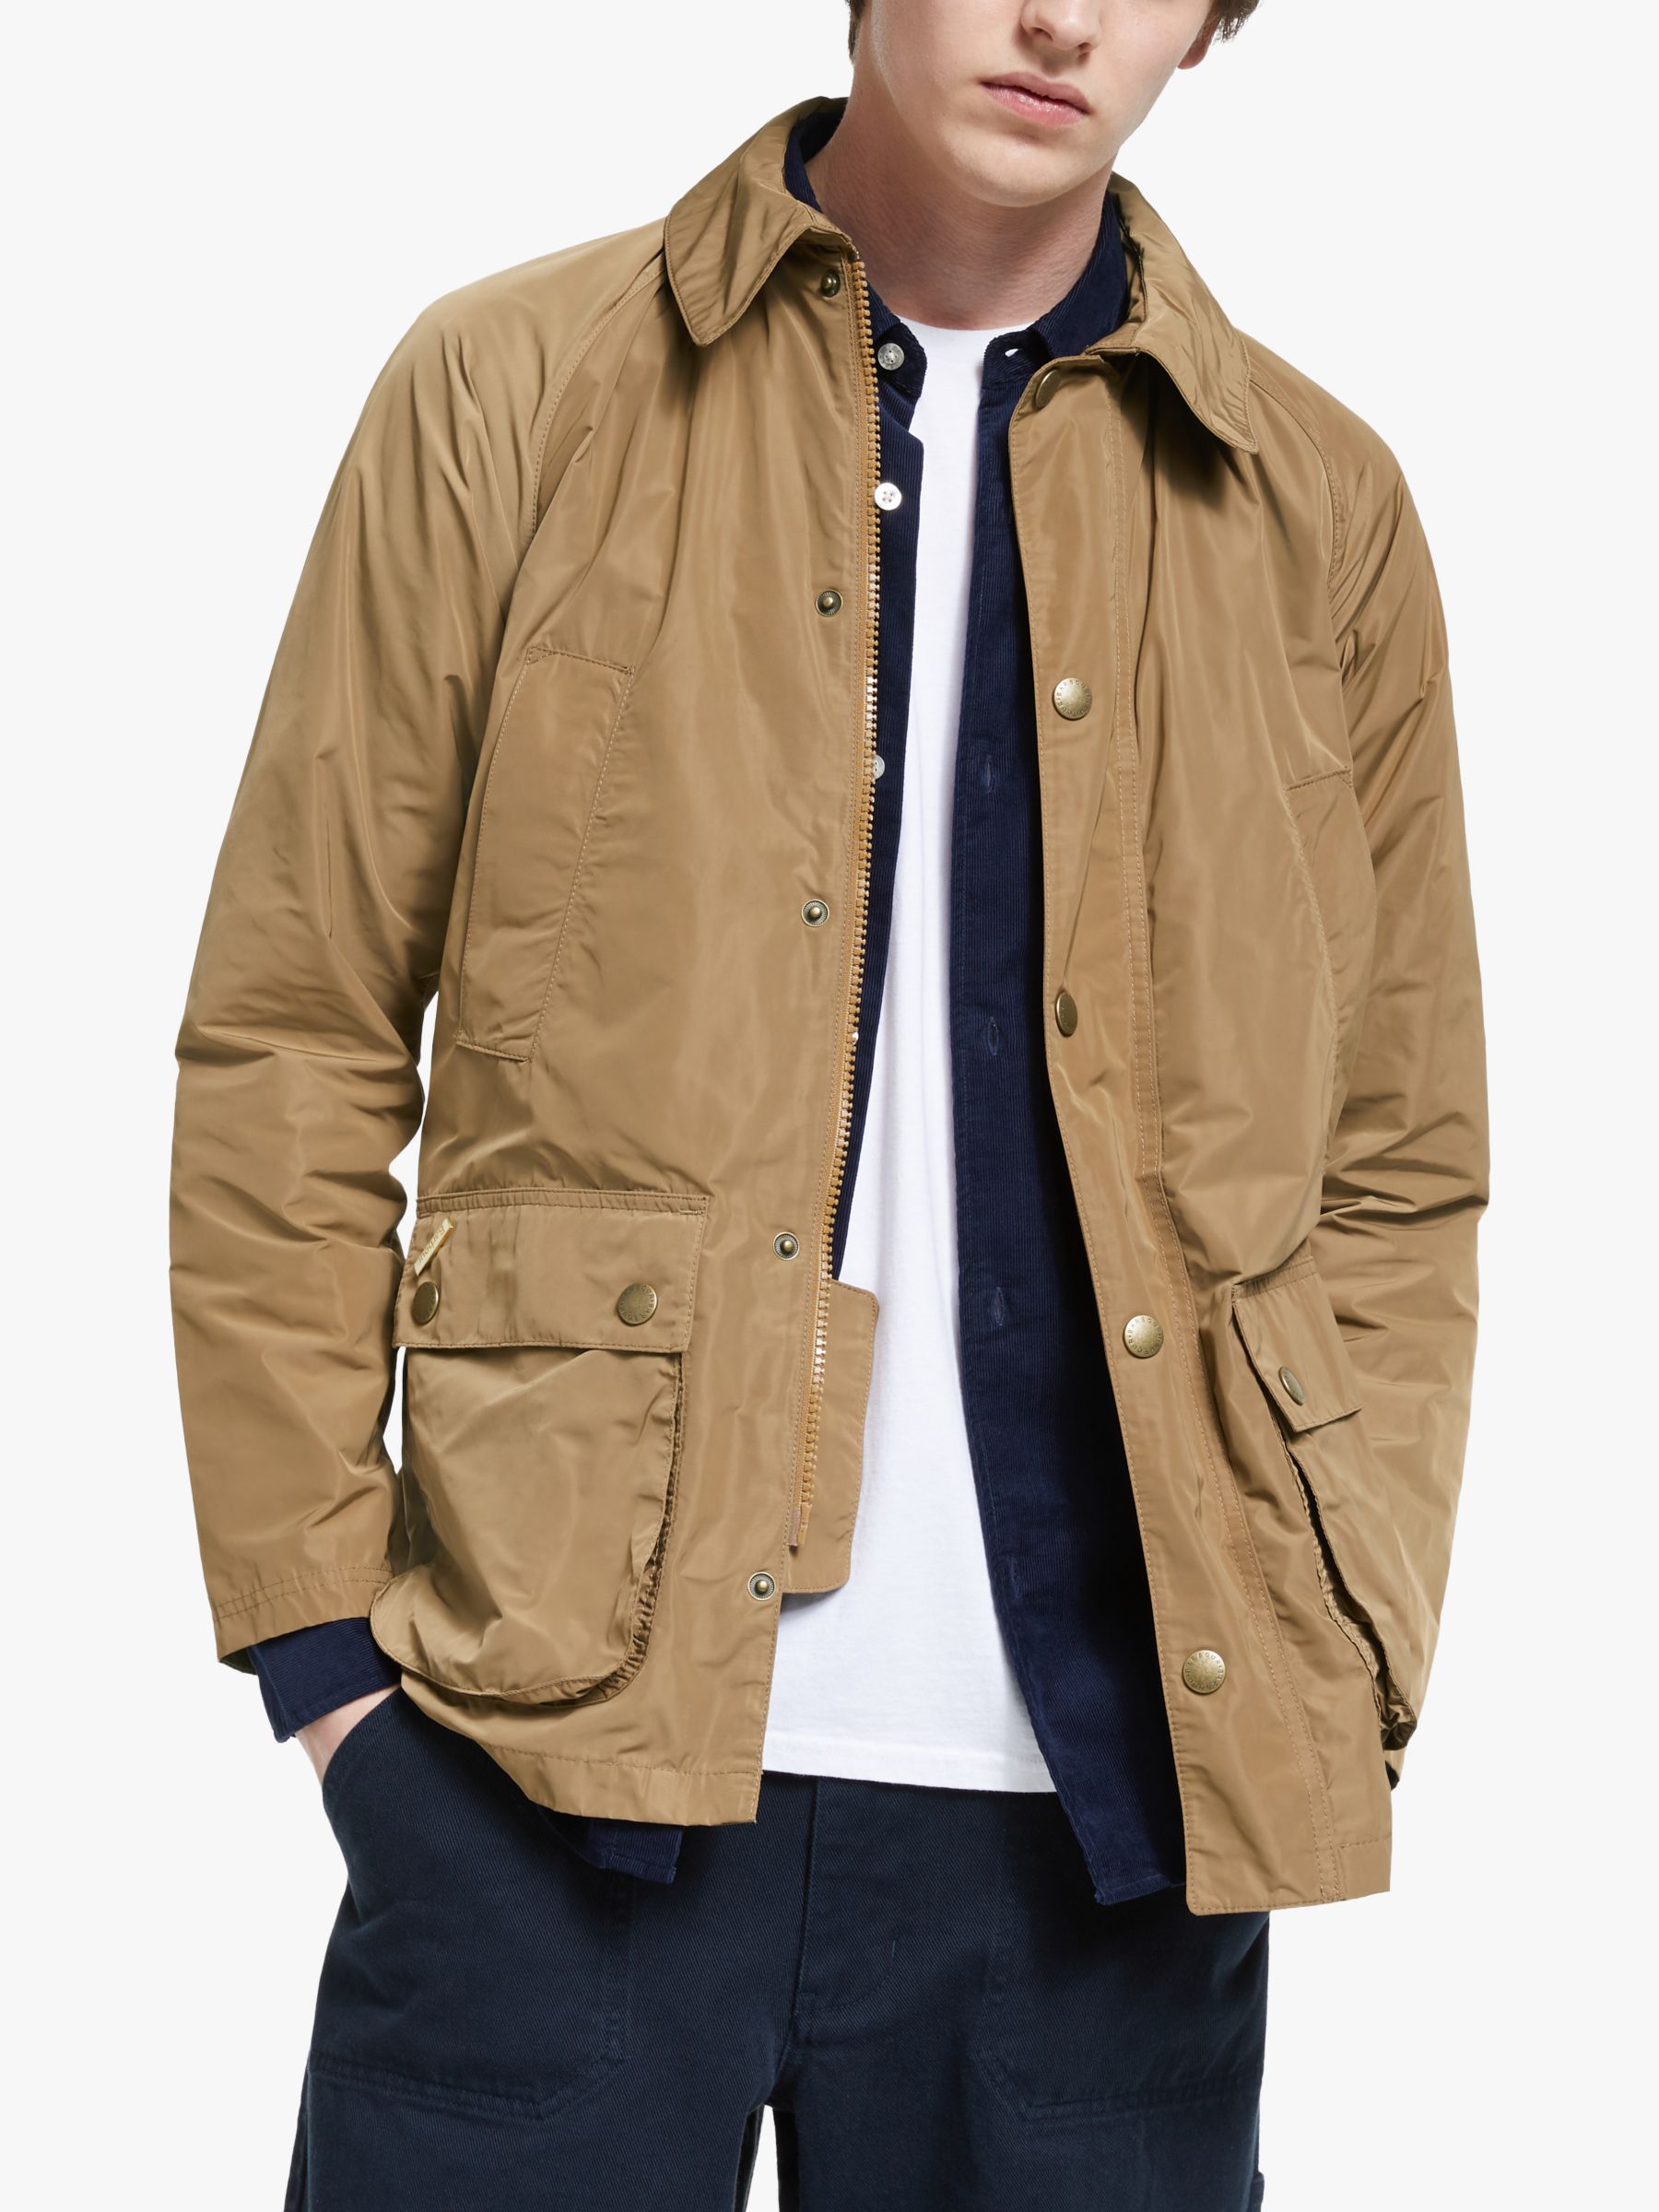 barbour free delivery code